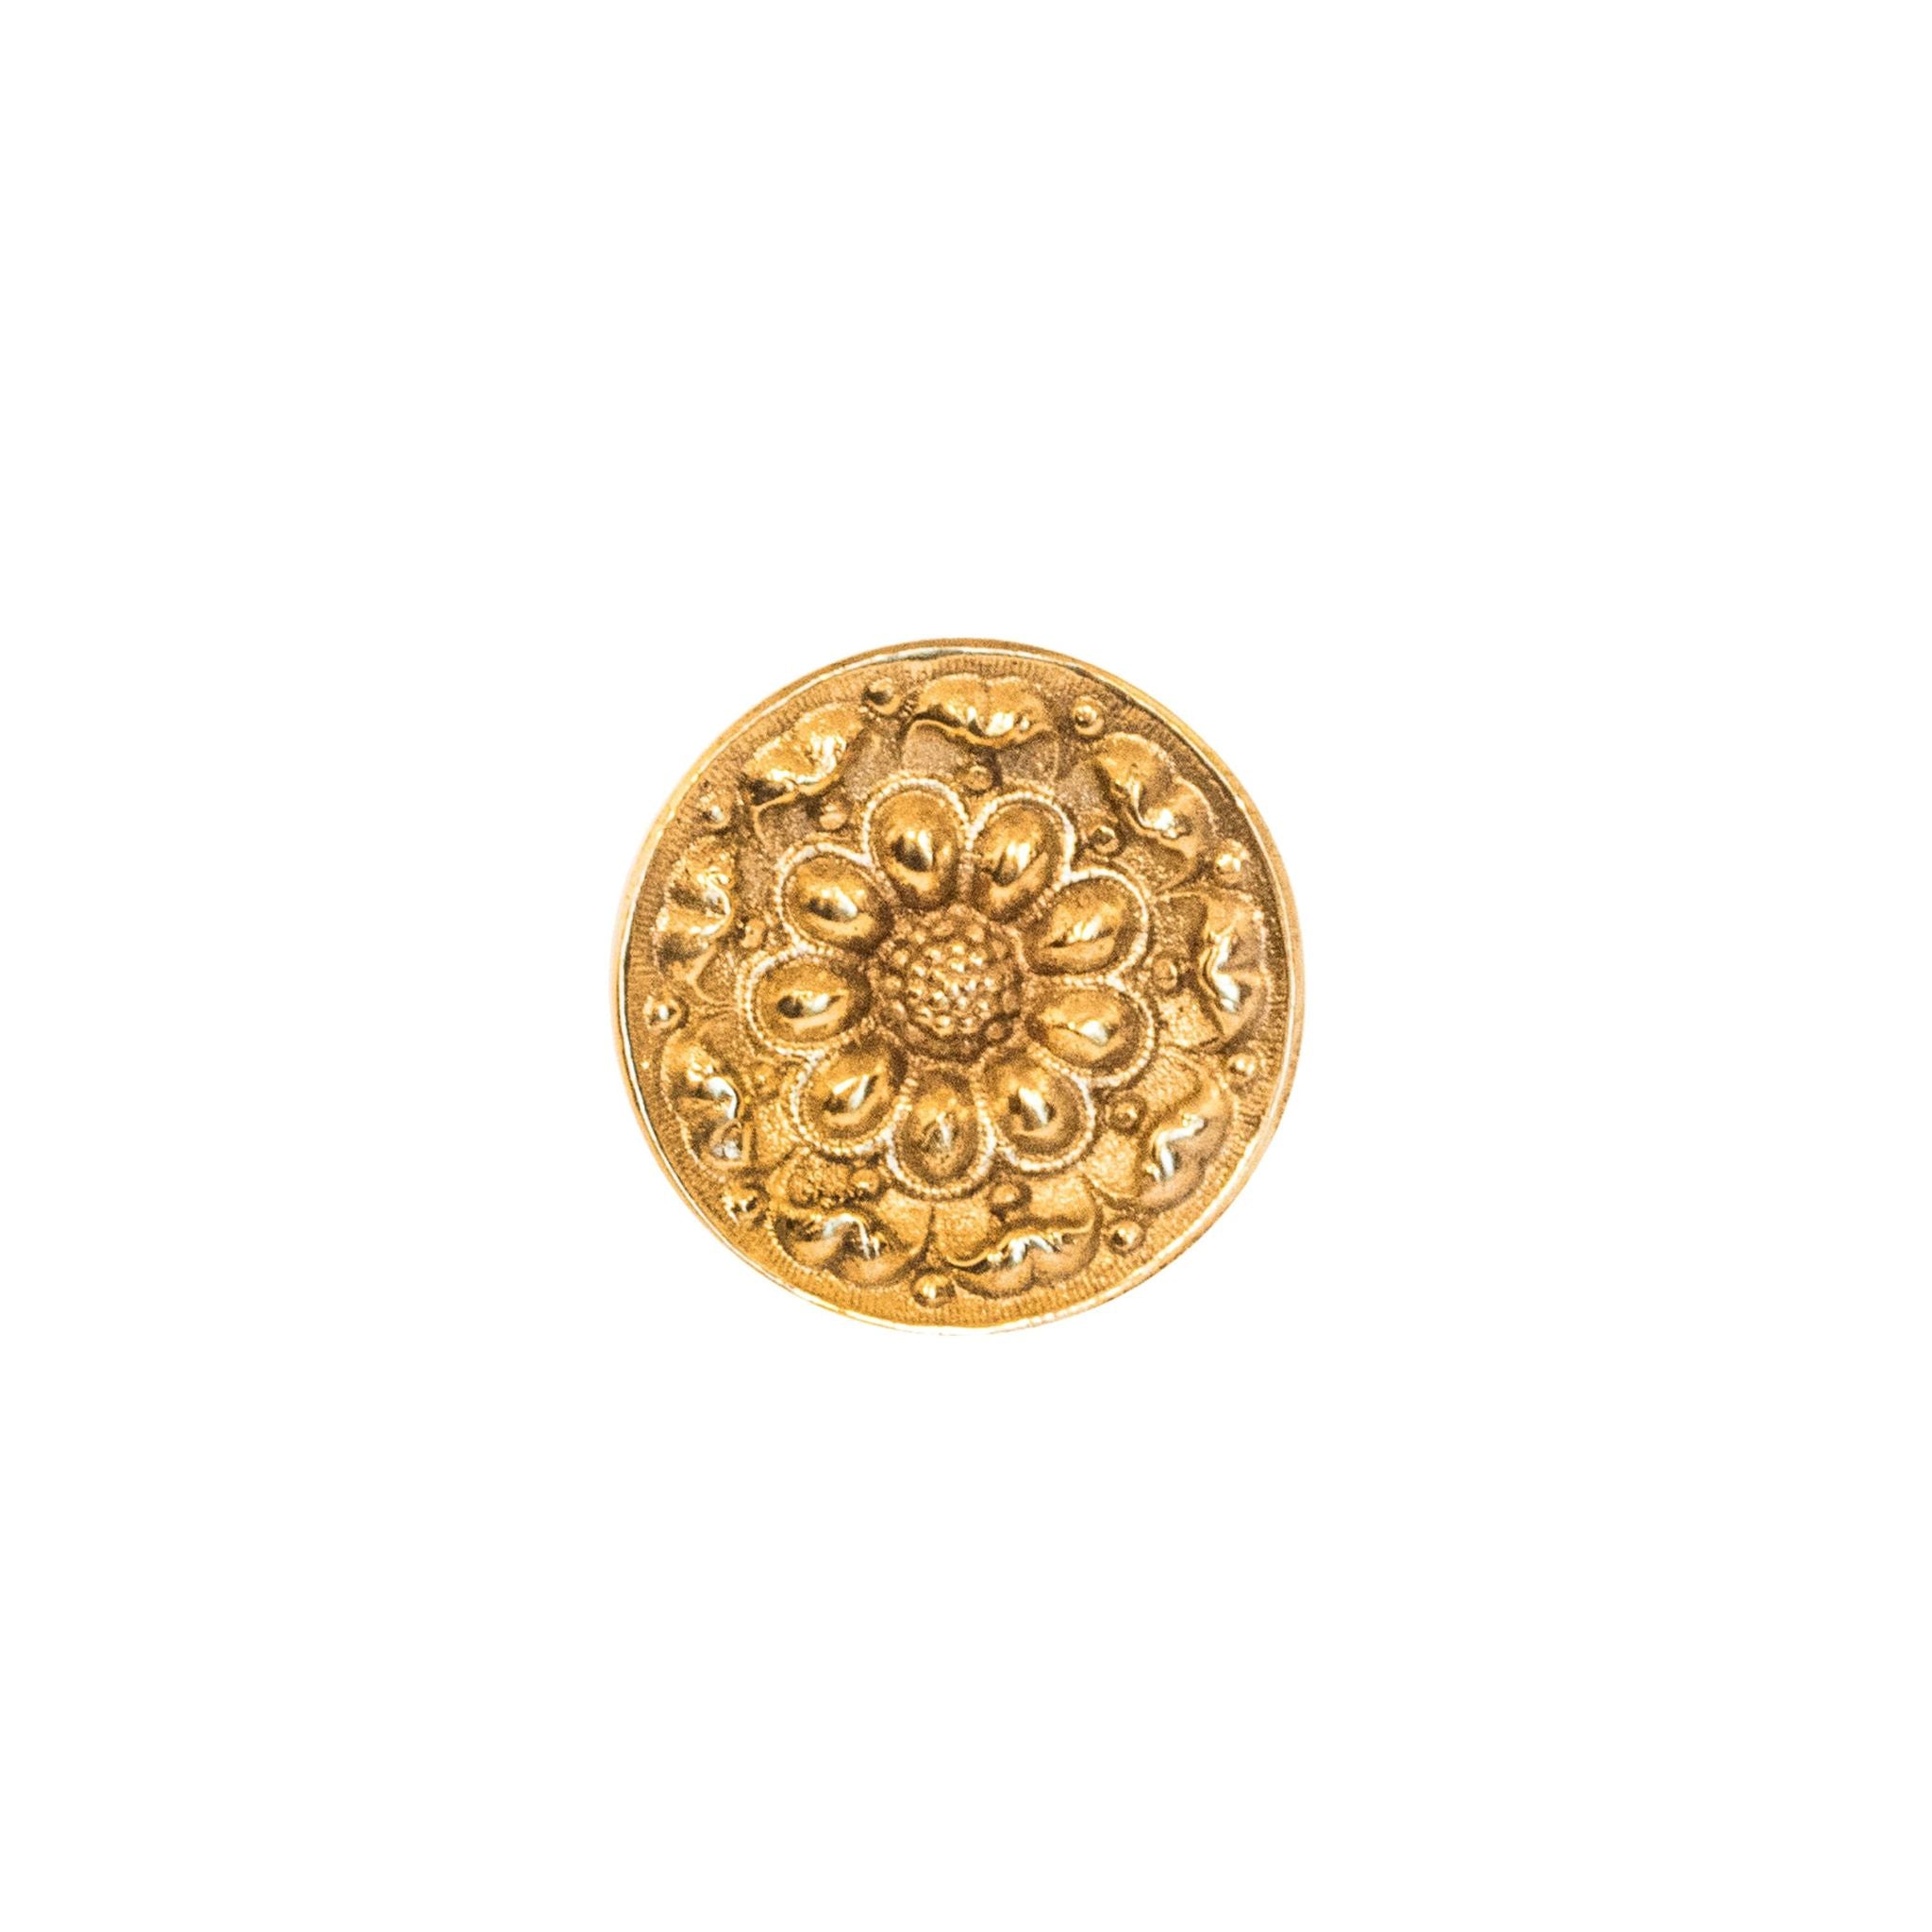 Novecento Stoccolma Brass Knob: A circular brass knob featuring a delicate flower-shaped decoration, perfect for adding elegance to your décor.